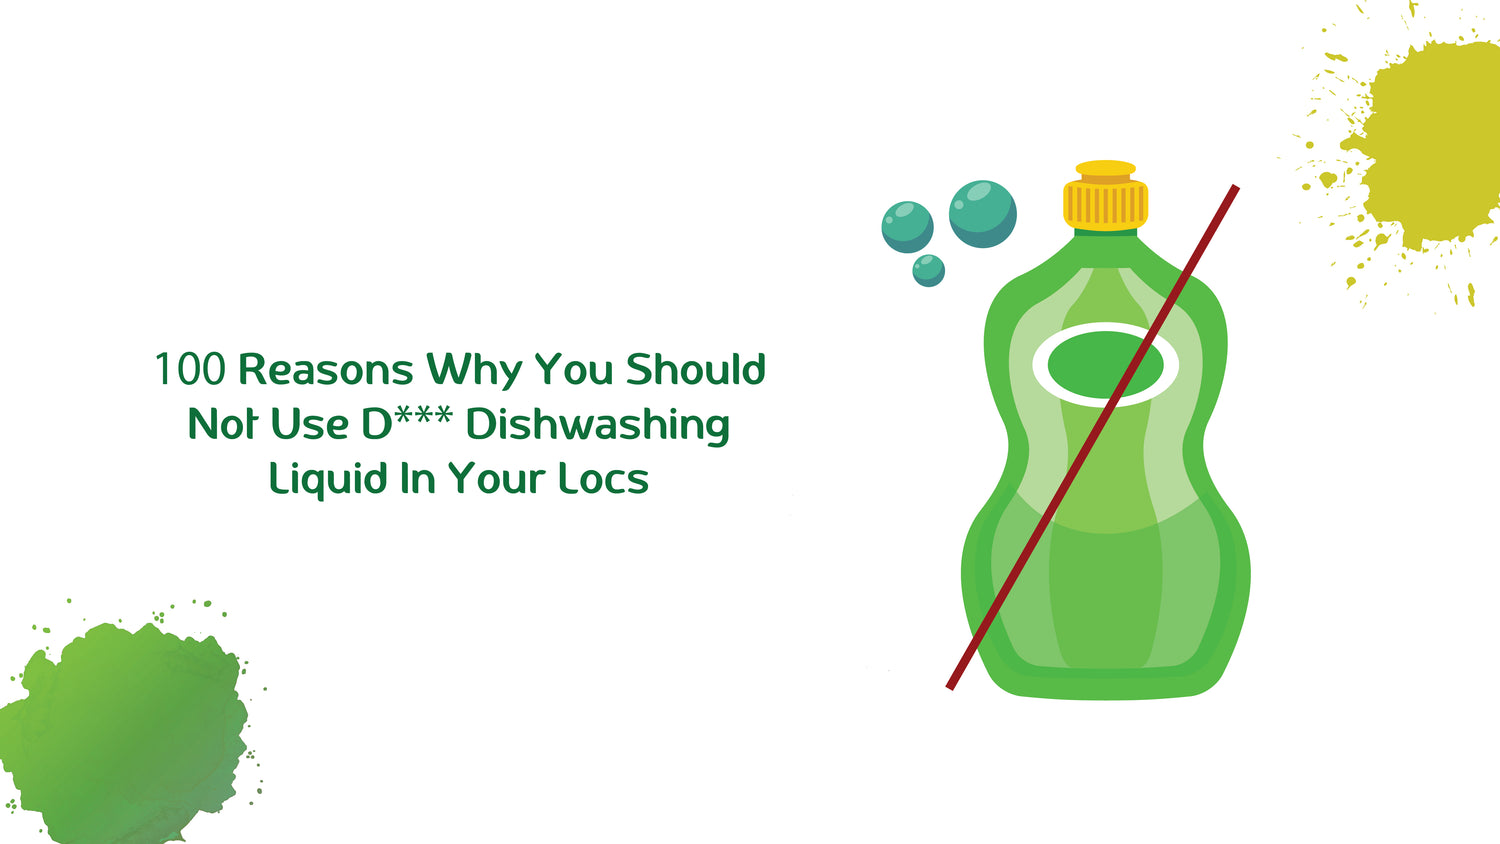 100 Reasons Why You Should Not Use D*** Dishwashing Liquid In Your Locs